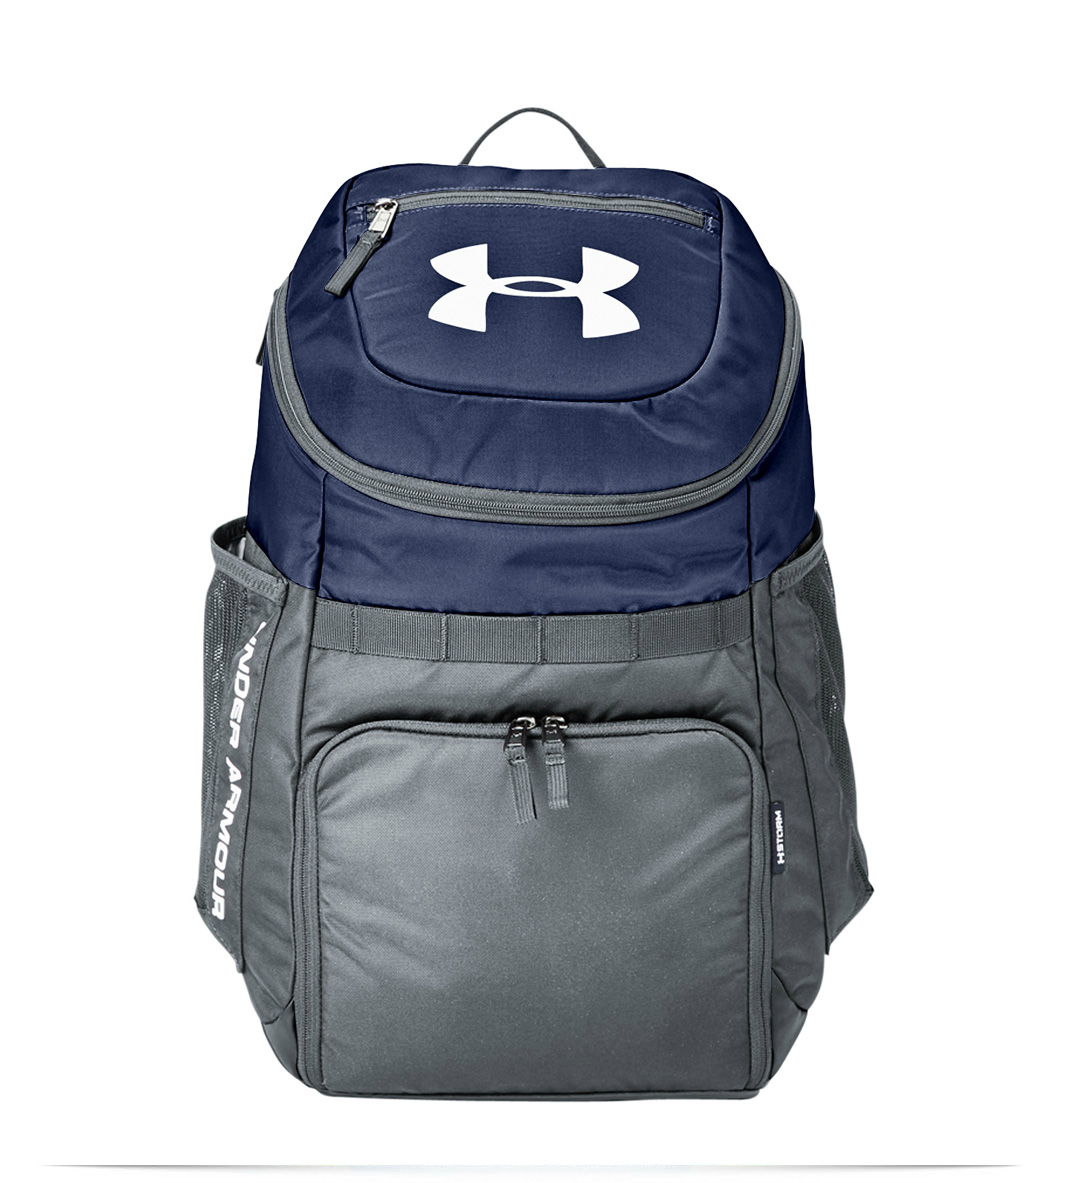 under armour ua backpack